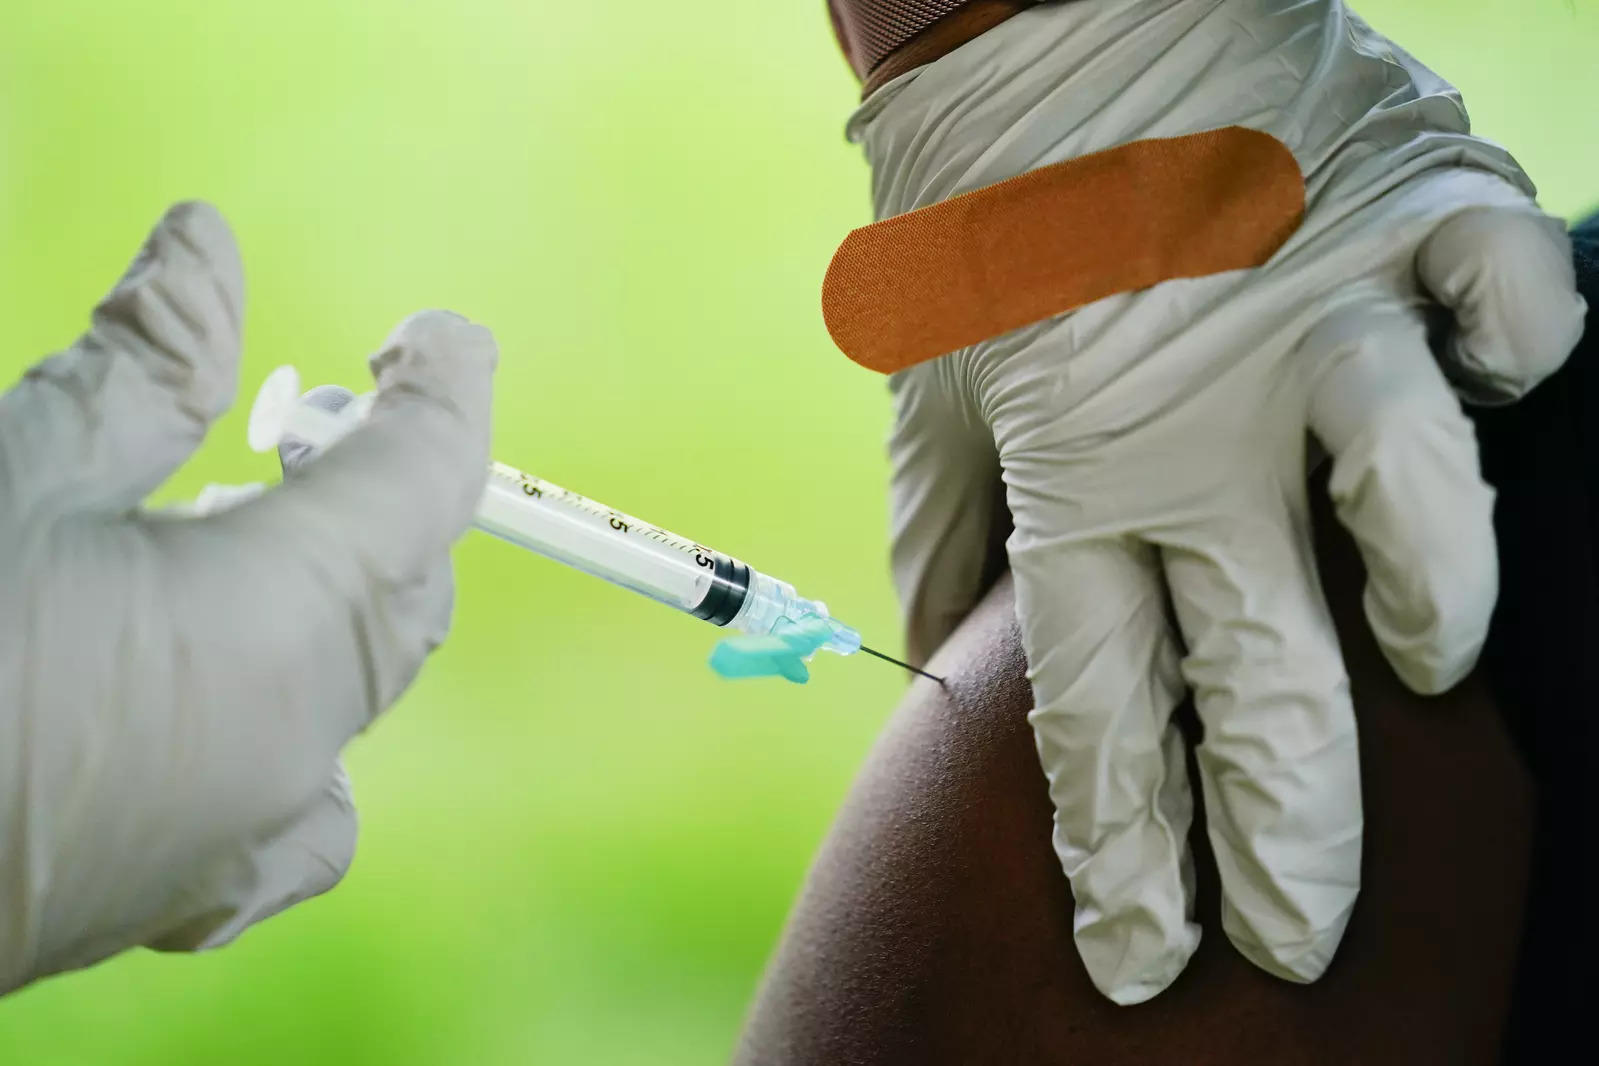 Gavi renews focus on integration of COVAX into other core routine immunisation services